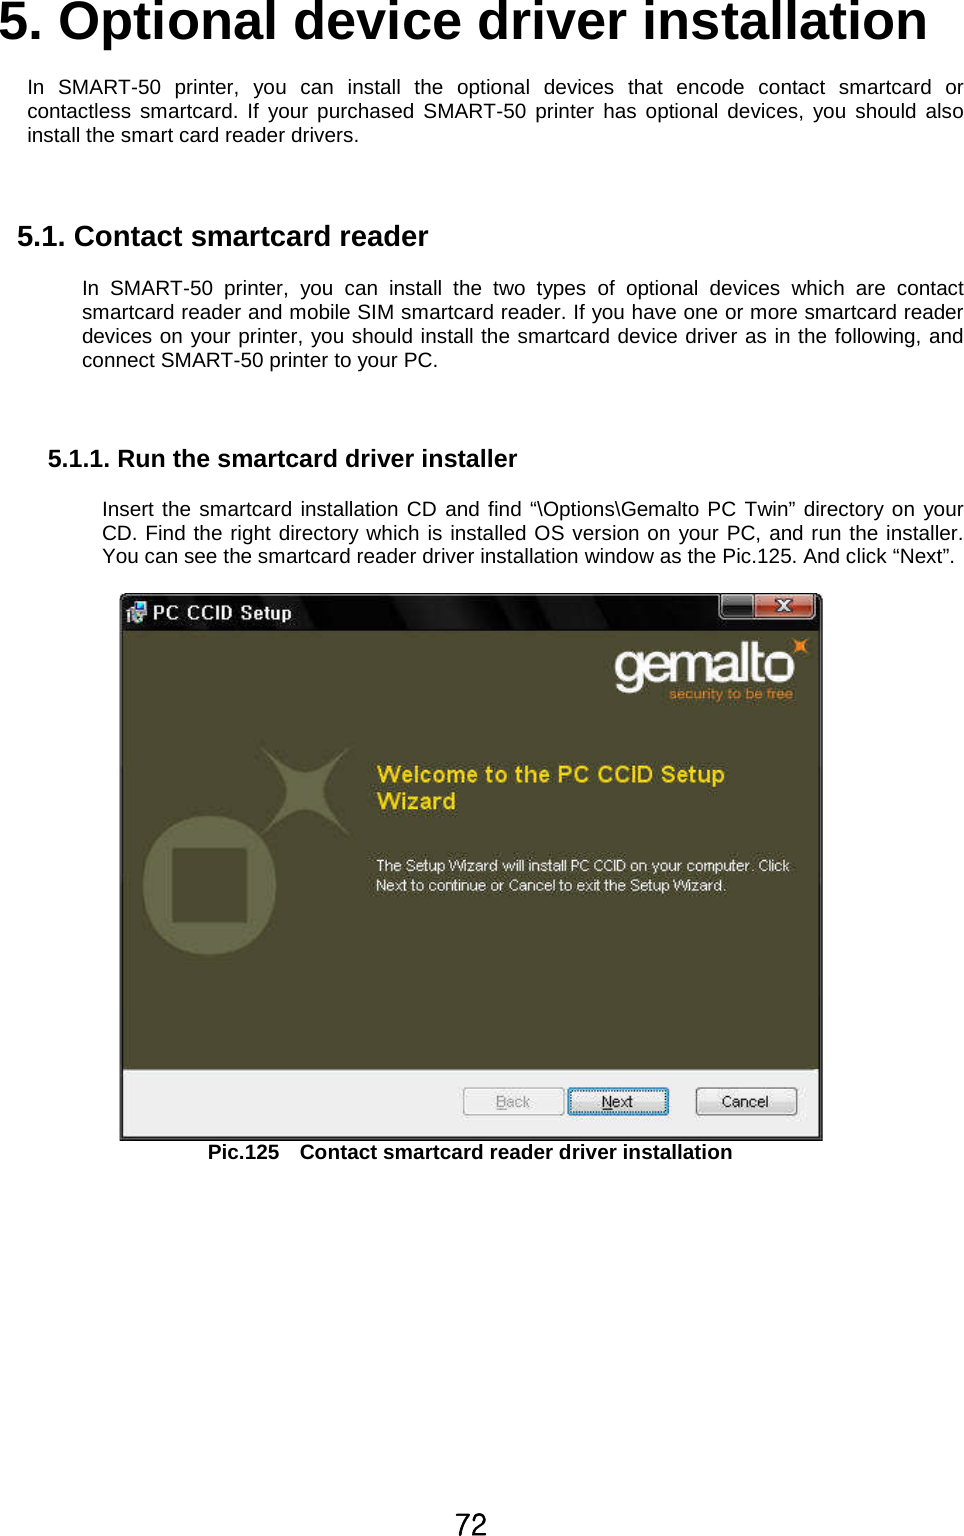 ^Y5. Optional device driver installationIn SMART-50 printer, you can install the optional devices that encode contact smartcard orcontactless smartcard. If your purchased SMART-50 printer has optional devices, you should alsoinstall the smart card reader drivers.5.1. Contact smartcard readerIn SMART-50 printer, you can install the two types of optional devices which are contactsmartcard reader and mobile SIM smartcard reader. If you have one or more smartcard readerdevices on your printer, you should install the smartcard device driver as in the following, andconnect SMART-50 printer to your PC.5.1.1. Run the smartcard driver installerInsert the smartcard installation CD and find “\Options\Gemalto PC Twin” directory on yourCD. Find the right directory which is installed OS version on your PC, and run the installer.You can see the smartcard reader driver installation window as the Pic.125. And click “Next”.Pic.125 Contact smartcard reader driver installation